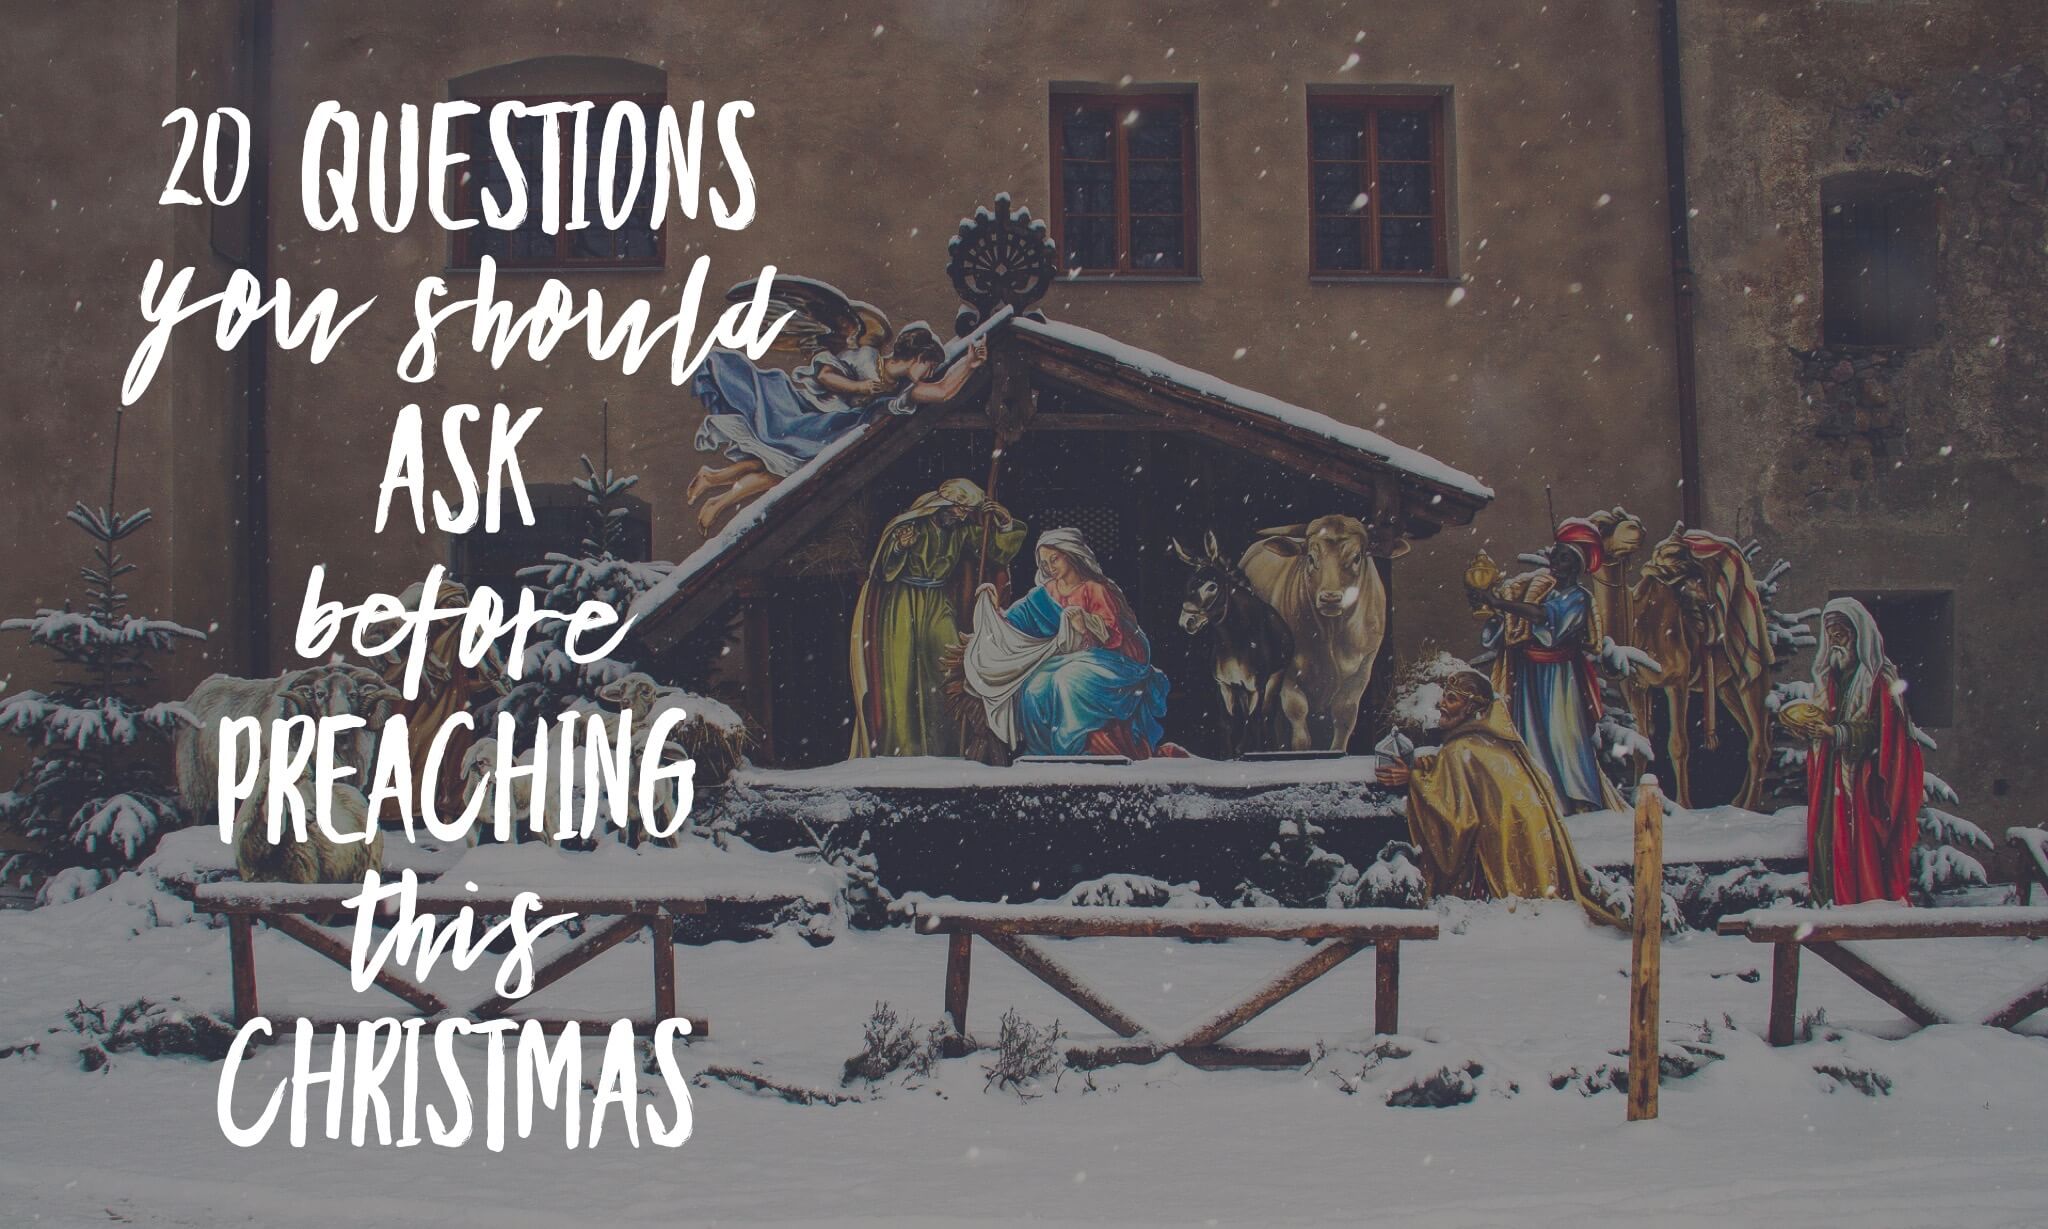 20 Questions You Should Ask Before Preaching This Christmas